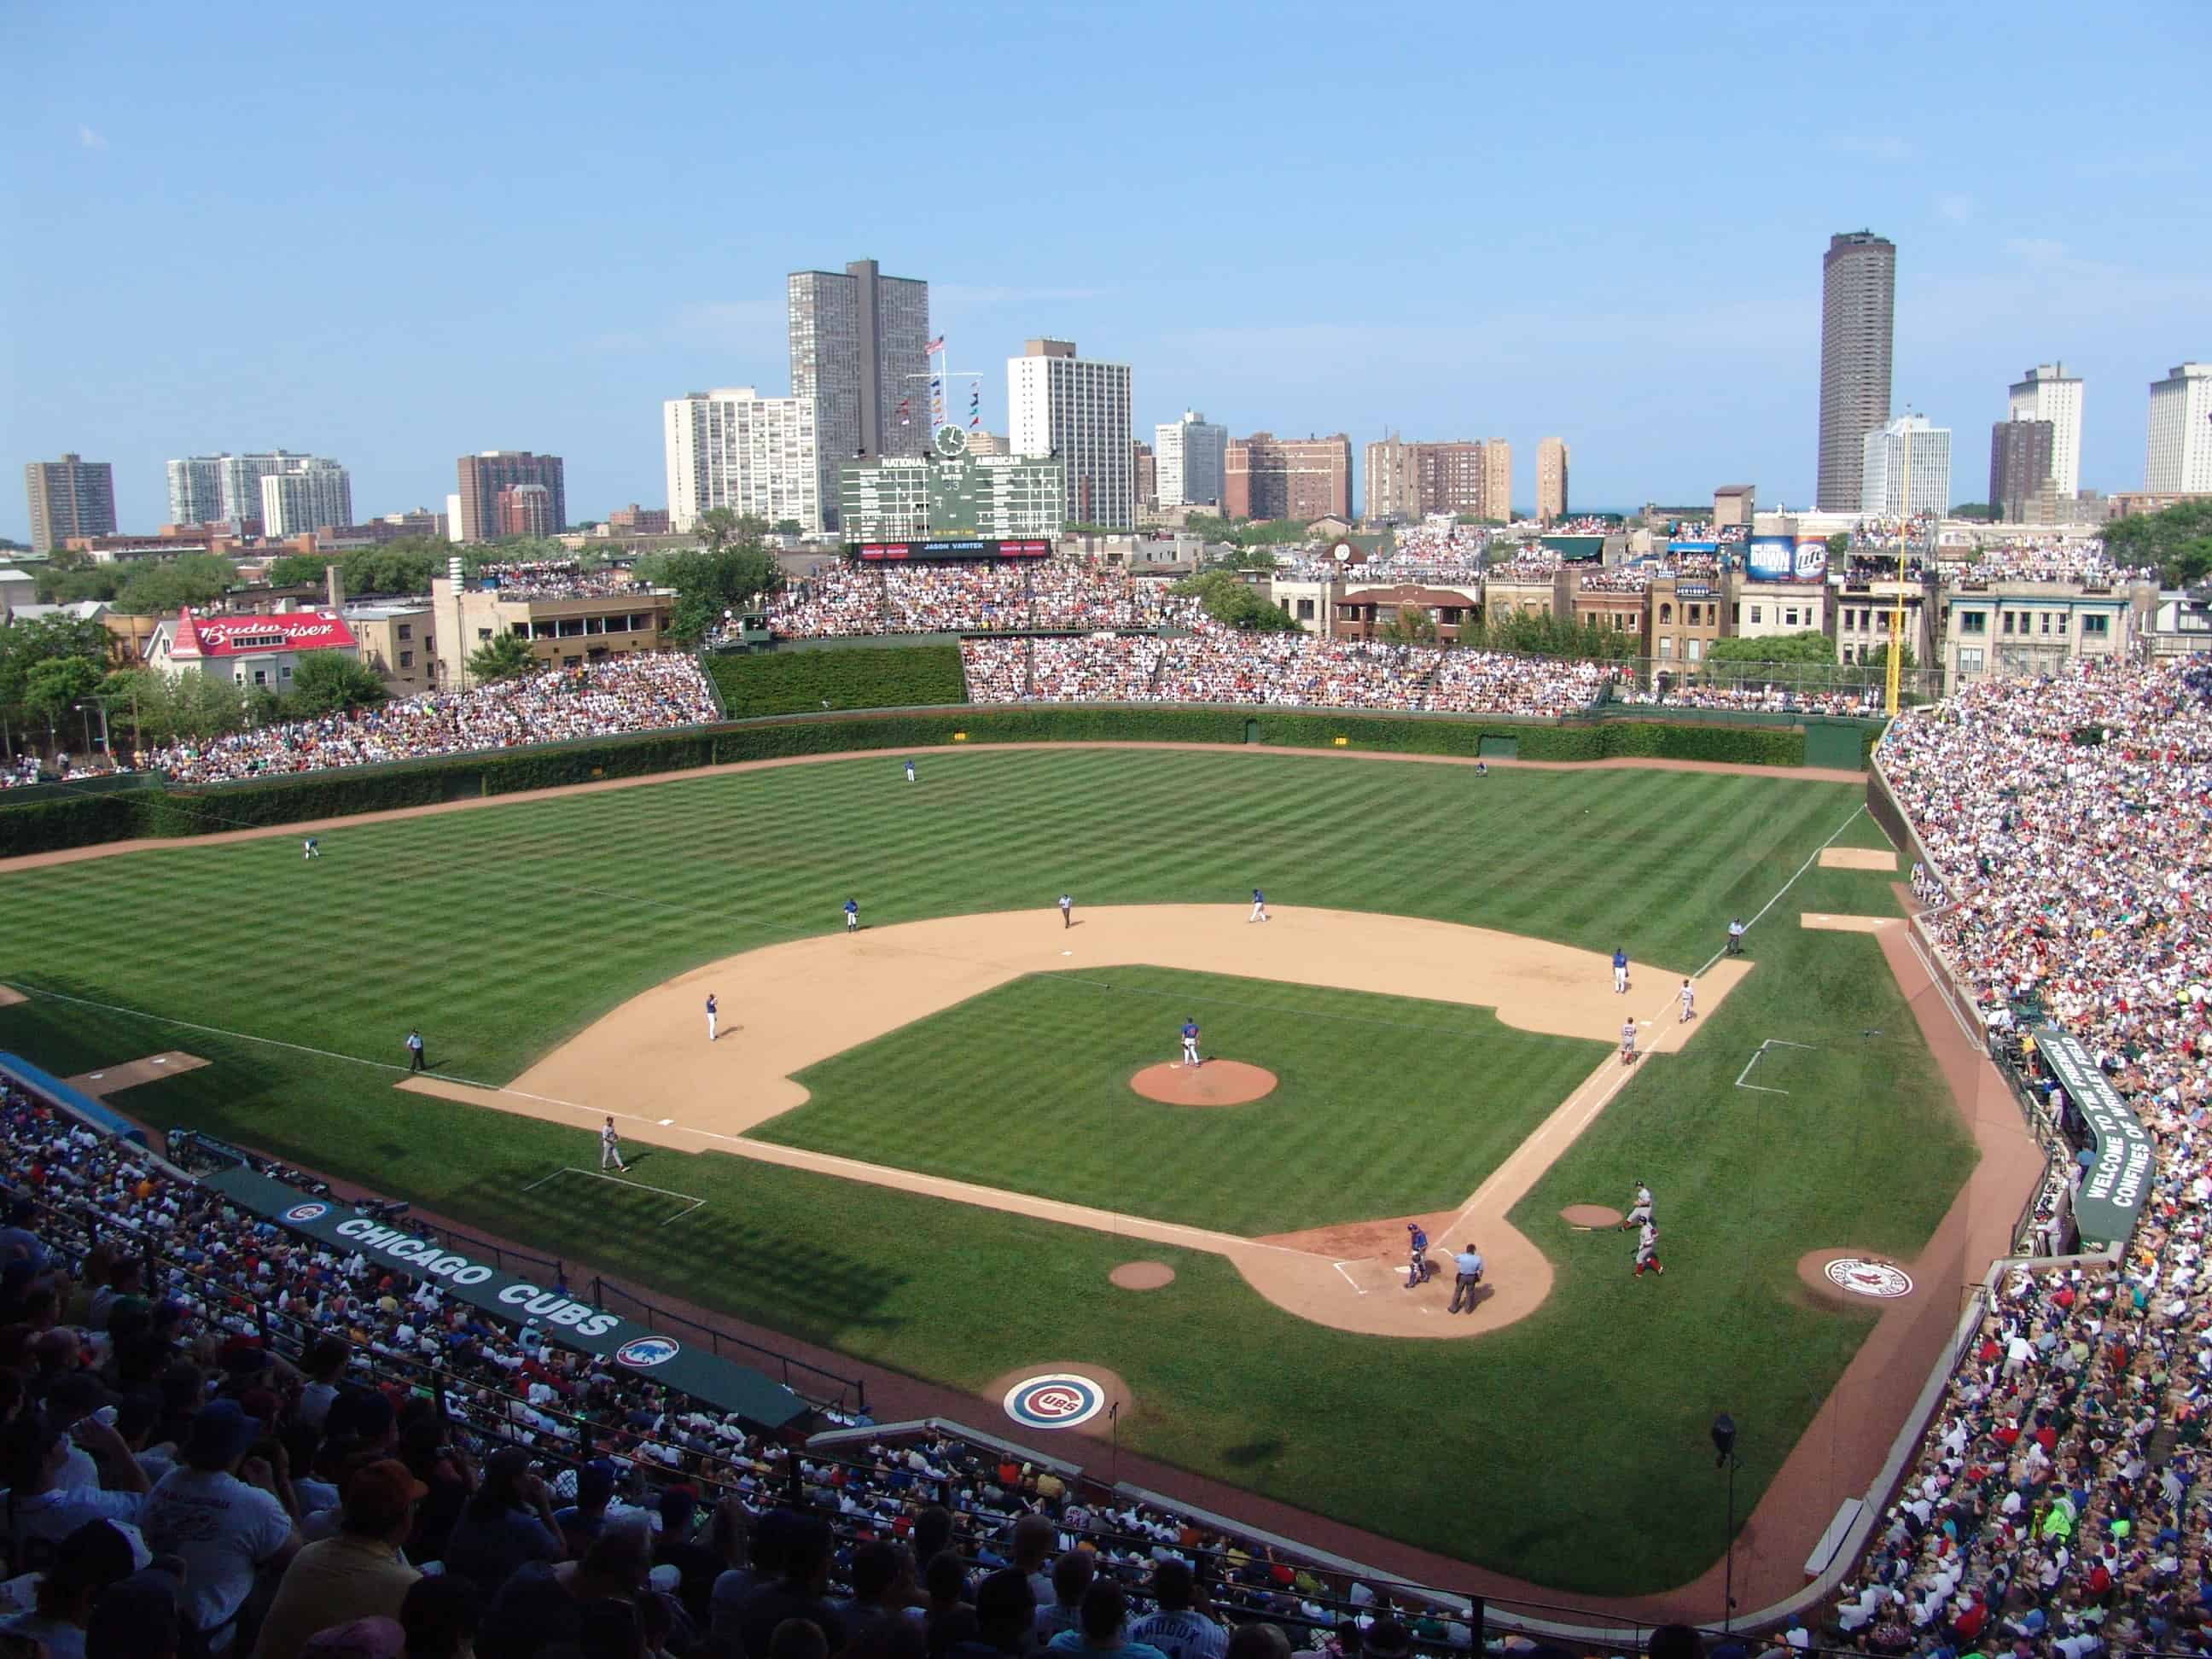 Wrigley Field in Lakeview, Chicago